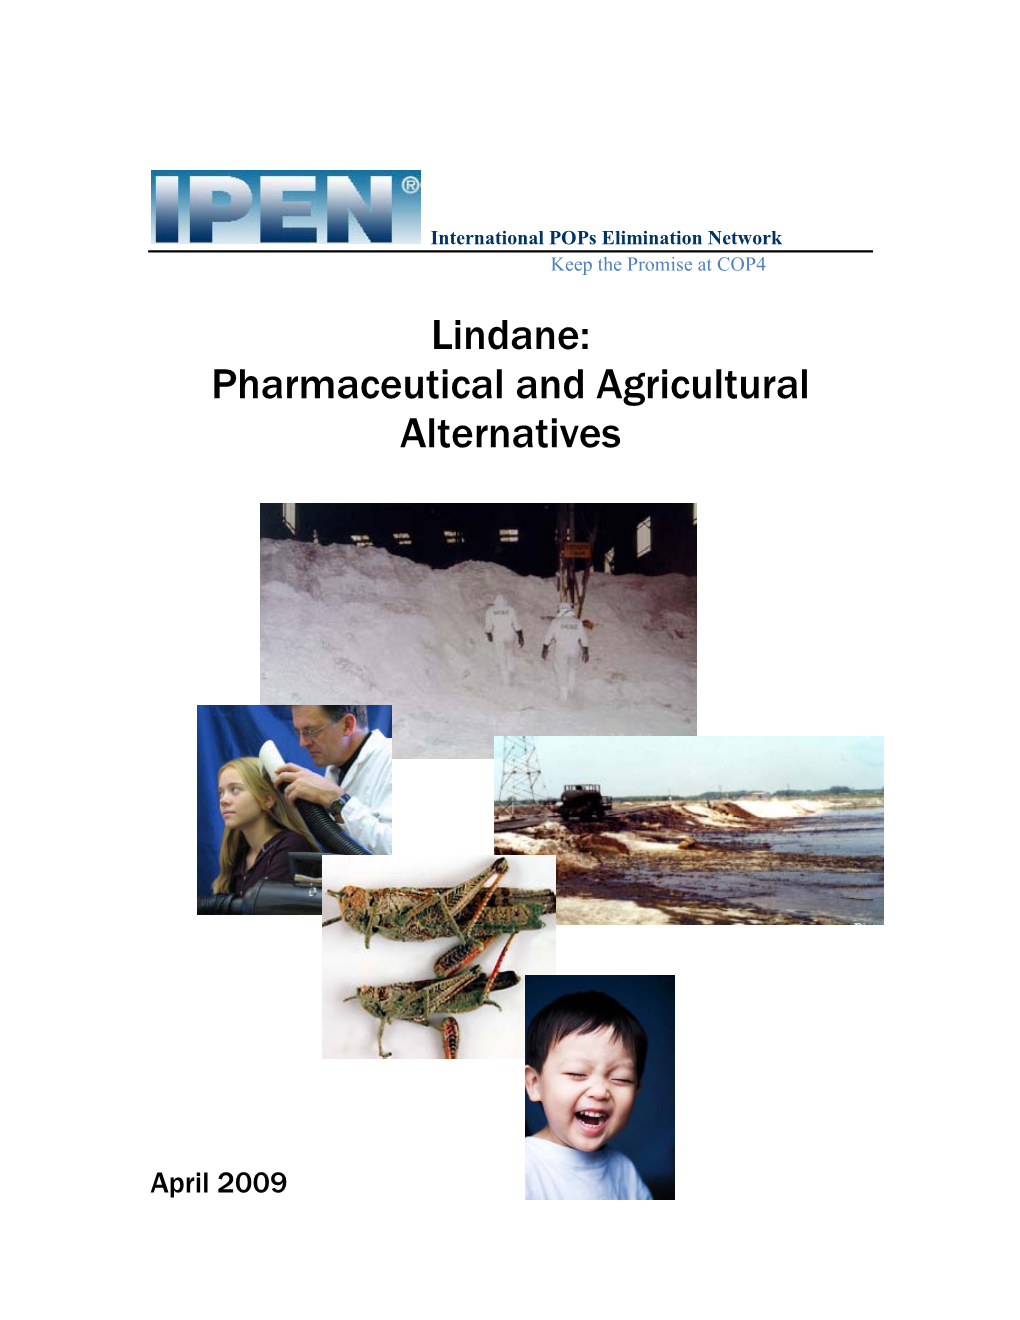 Lindane: Pharmaceutical and Agricultural Alternatives